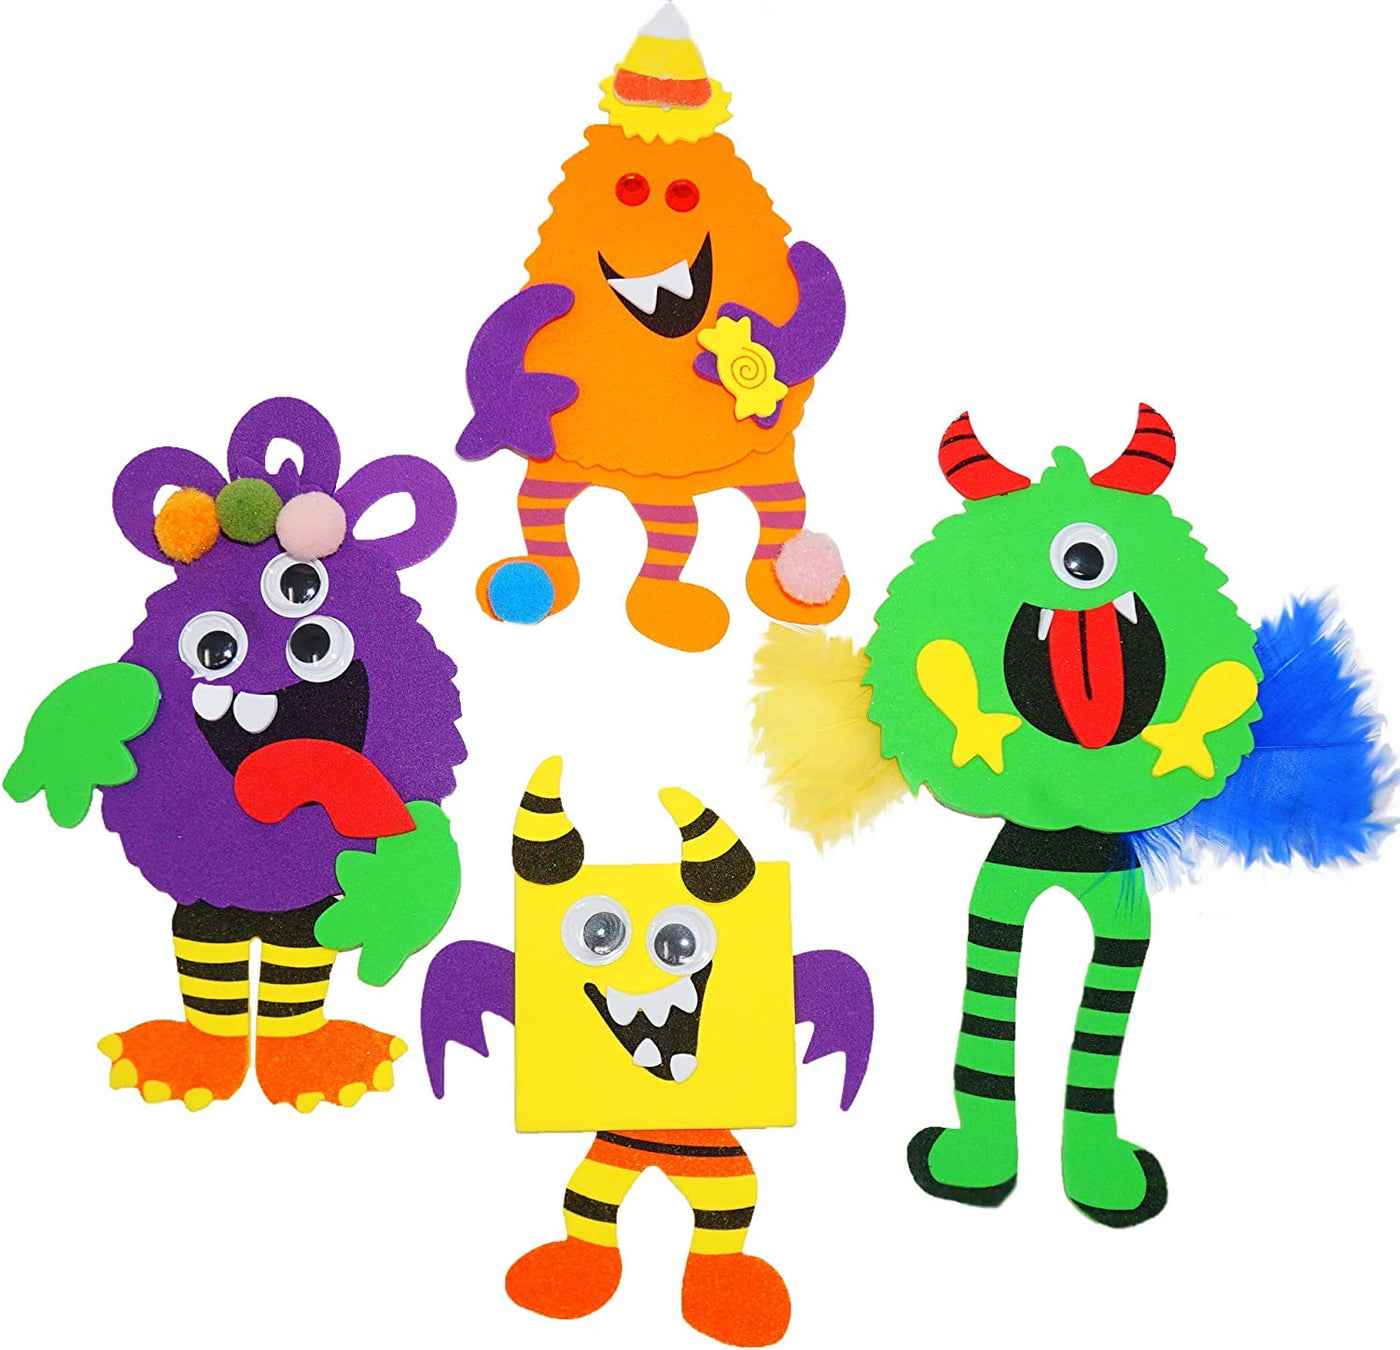 4E's Novelty Halloween Crafts for Kids (12 Pack) Silly Monsters Foam Magnet Fall Crafts for Kids Bulk, Halloween Party Activities for Kids Ages 3-5, 4-8